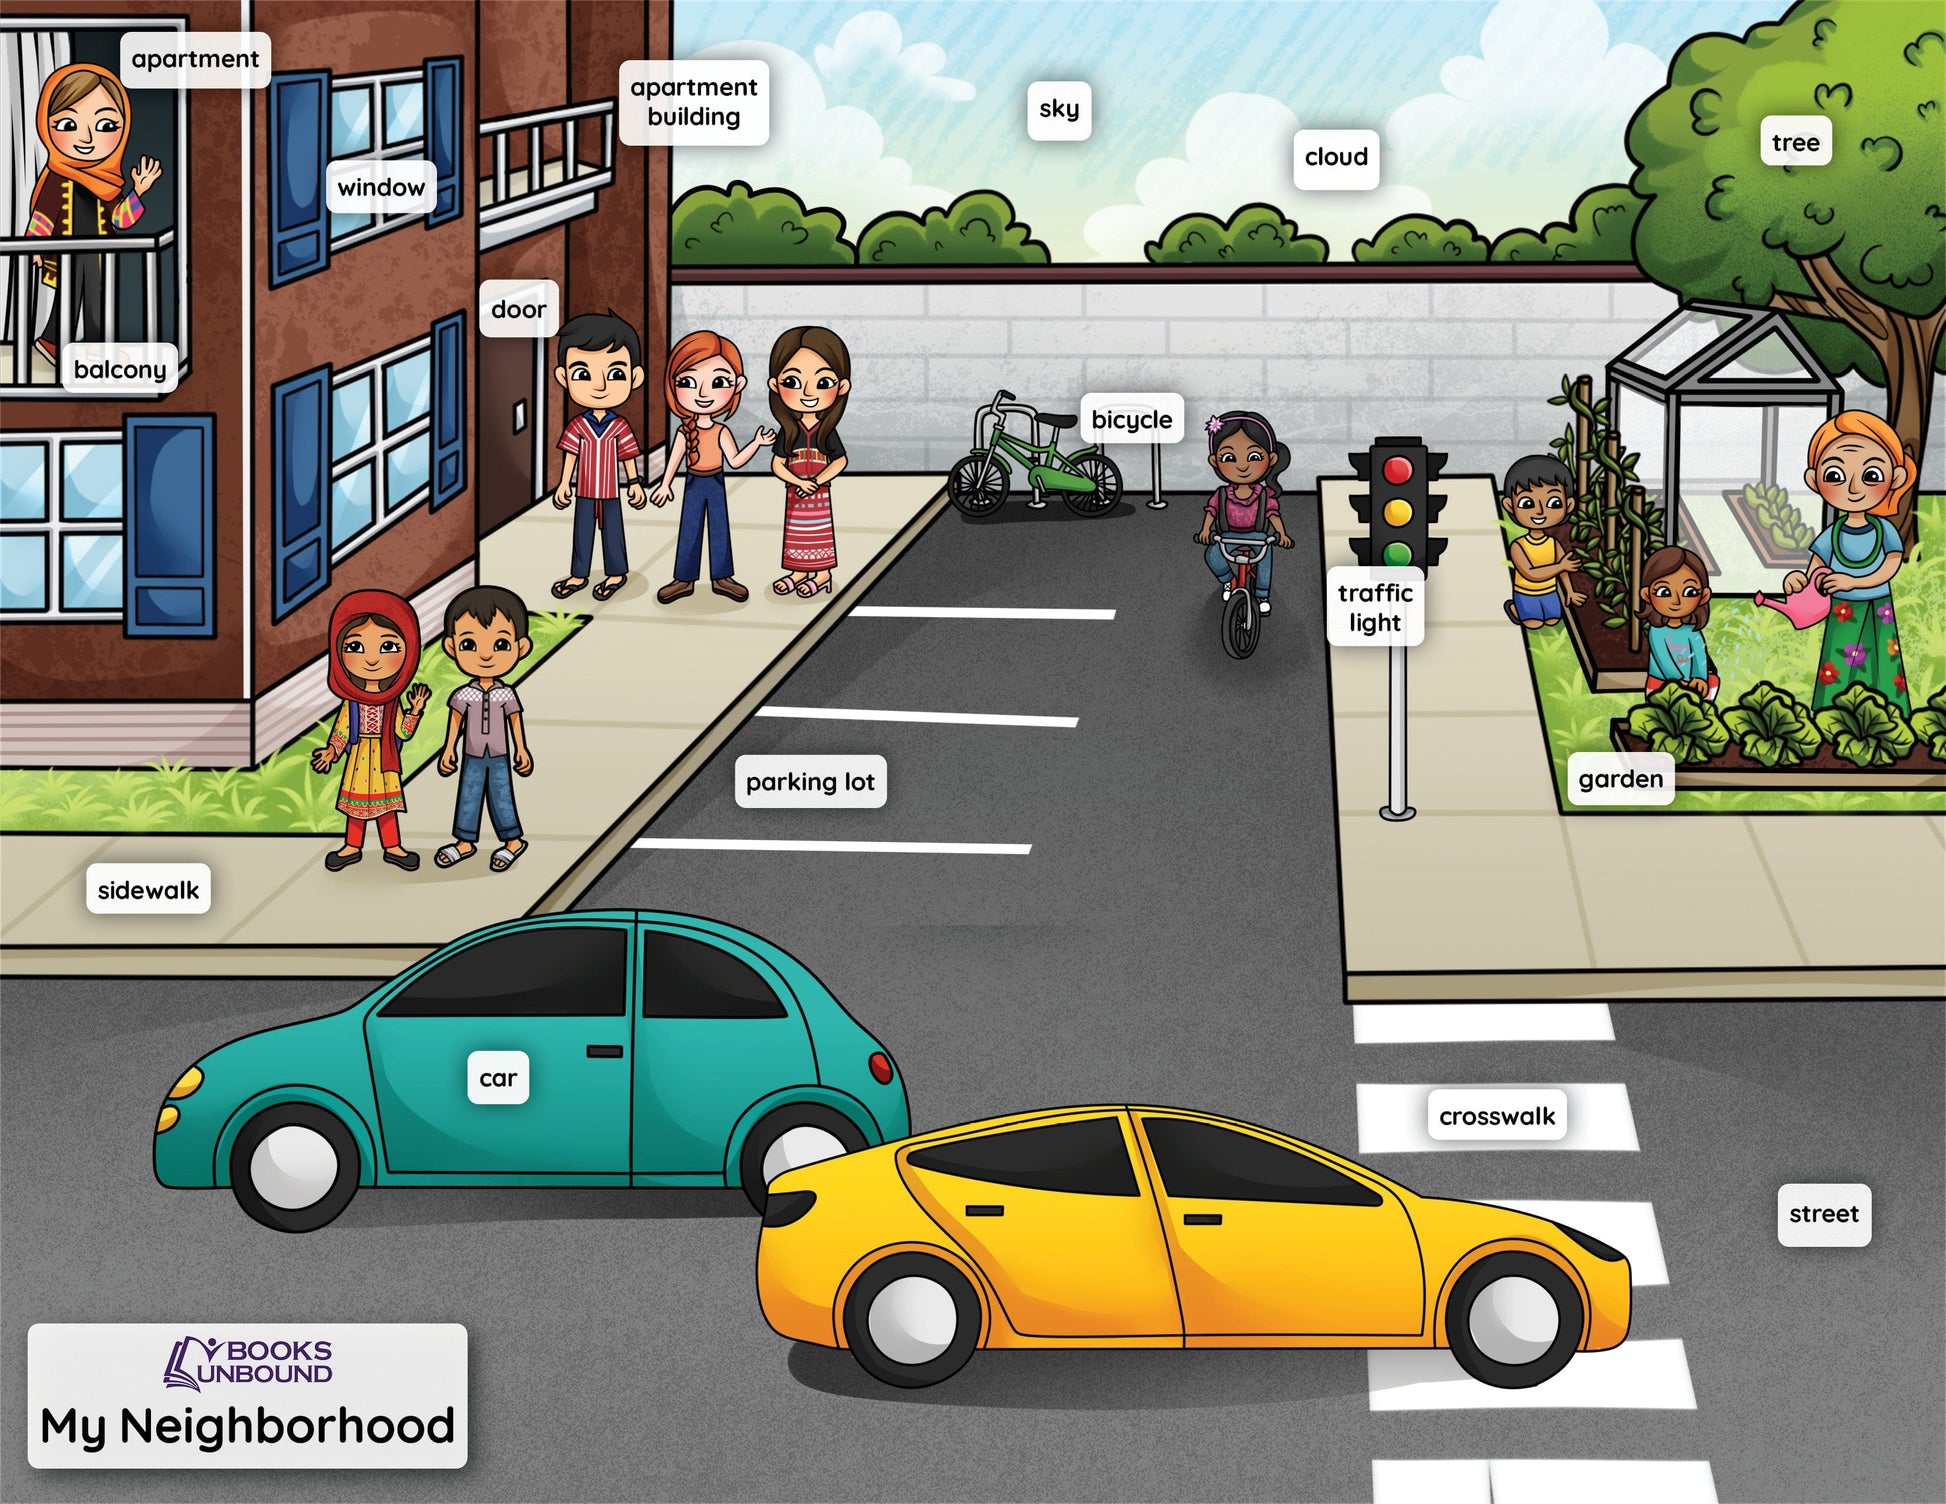 Books Unbound's English version of "My Neighborhood" - perfect for vocabulary building and conversation starters.